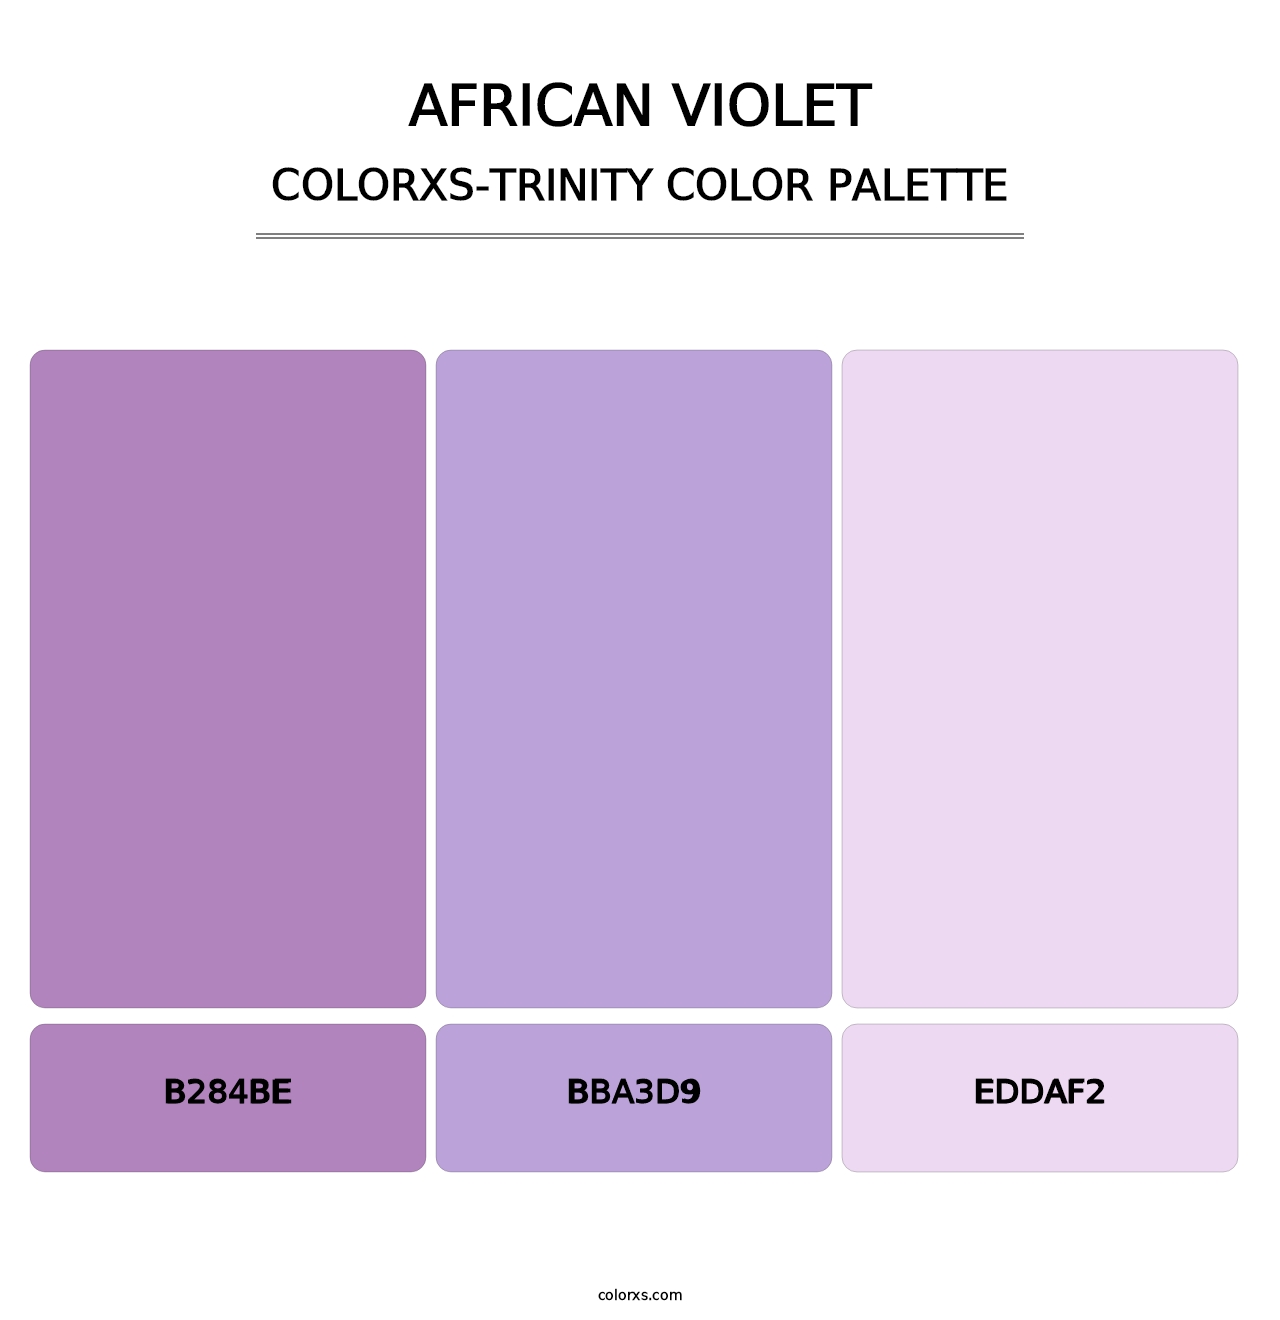 African Violet - Colorxs Trinity Palette